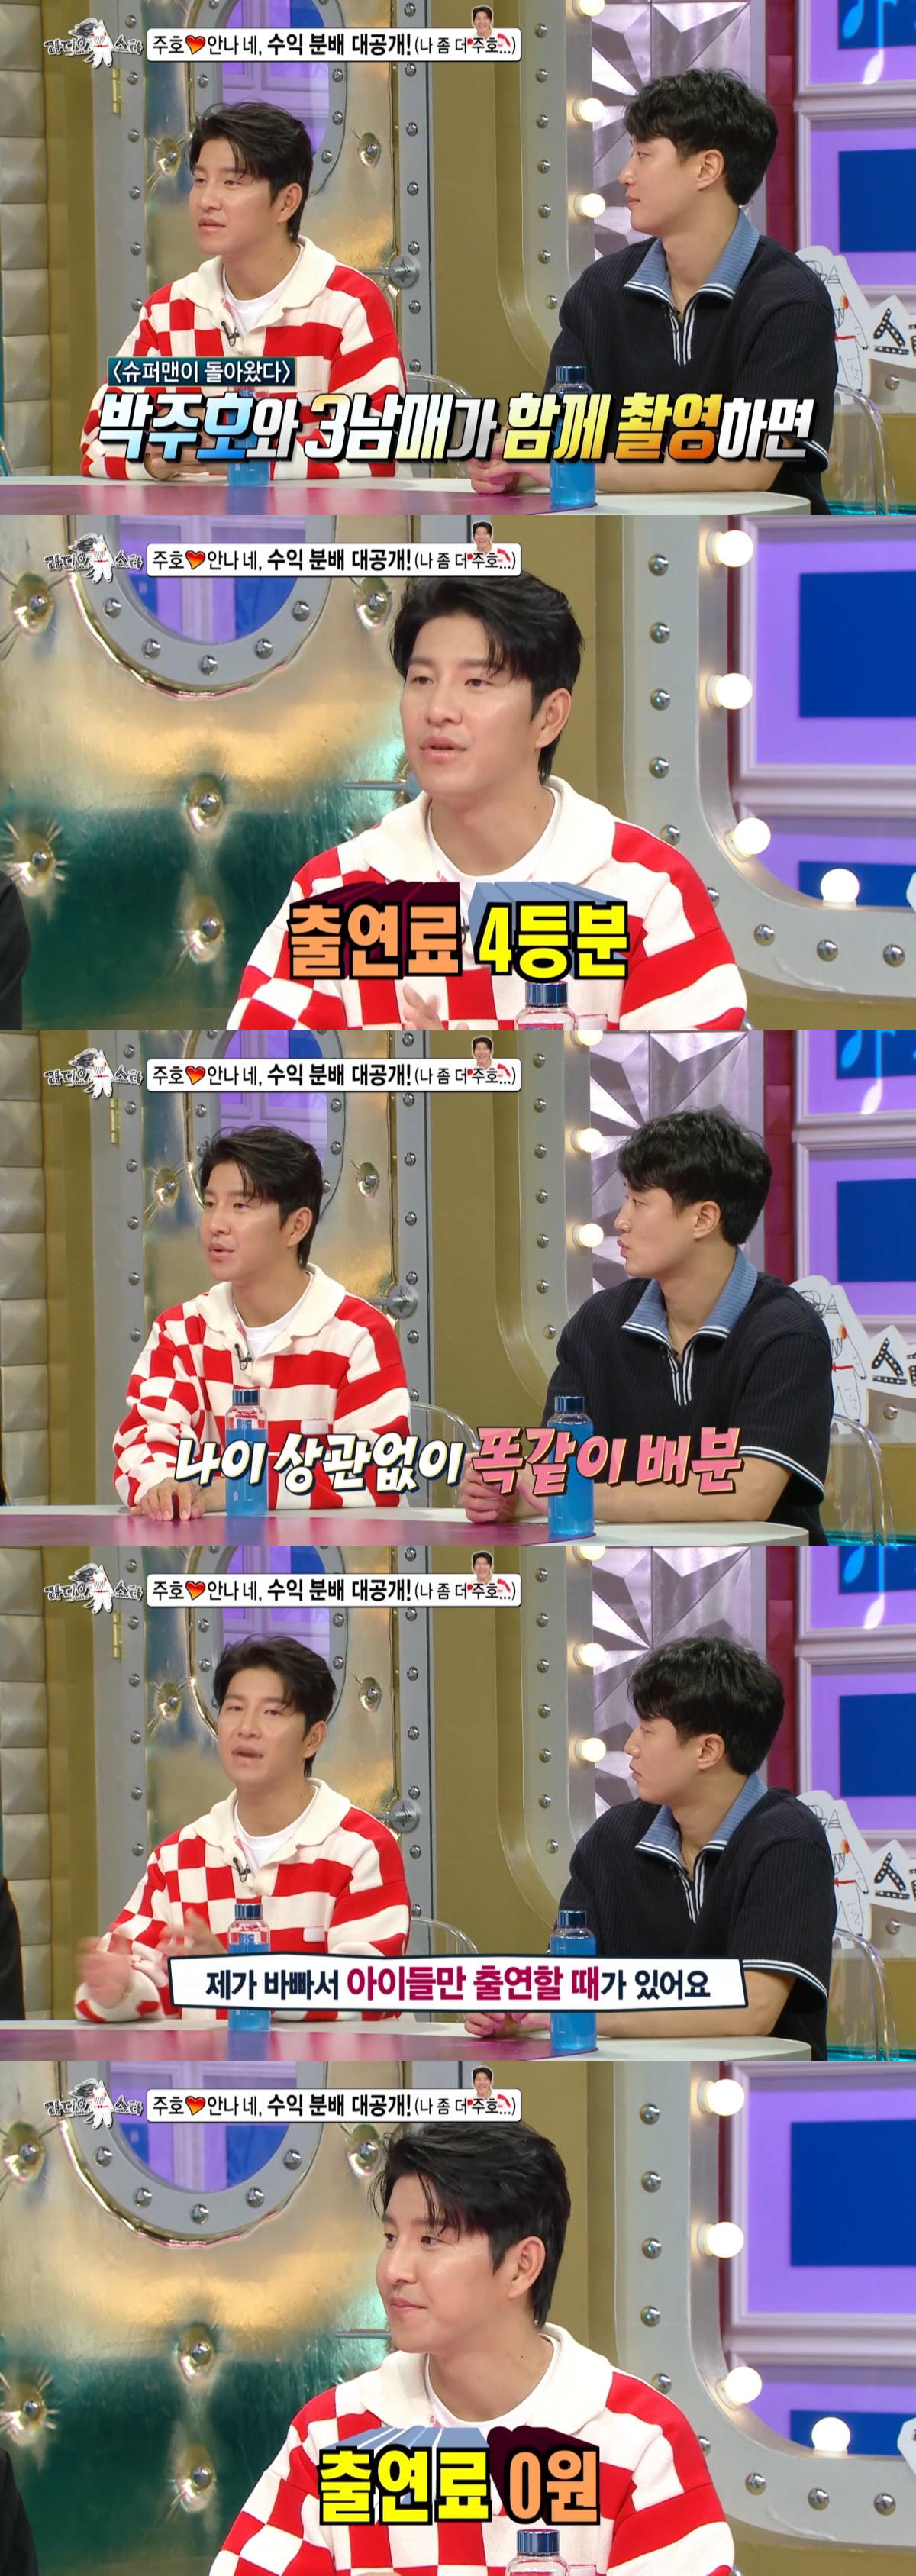 Soccer player Park Joo-ho "'The return of superman appearance fee, divided into 4 parts with children" 